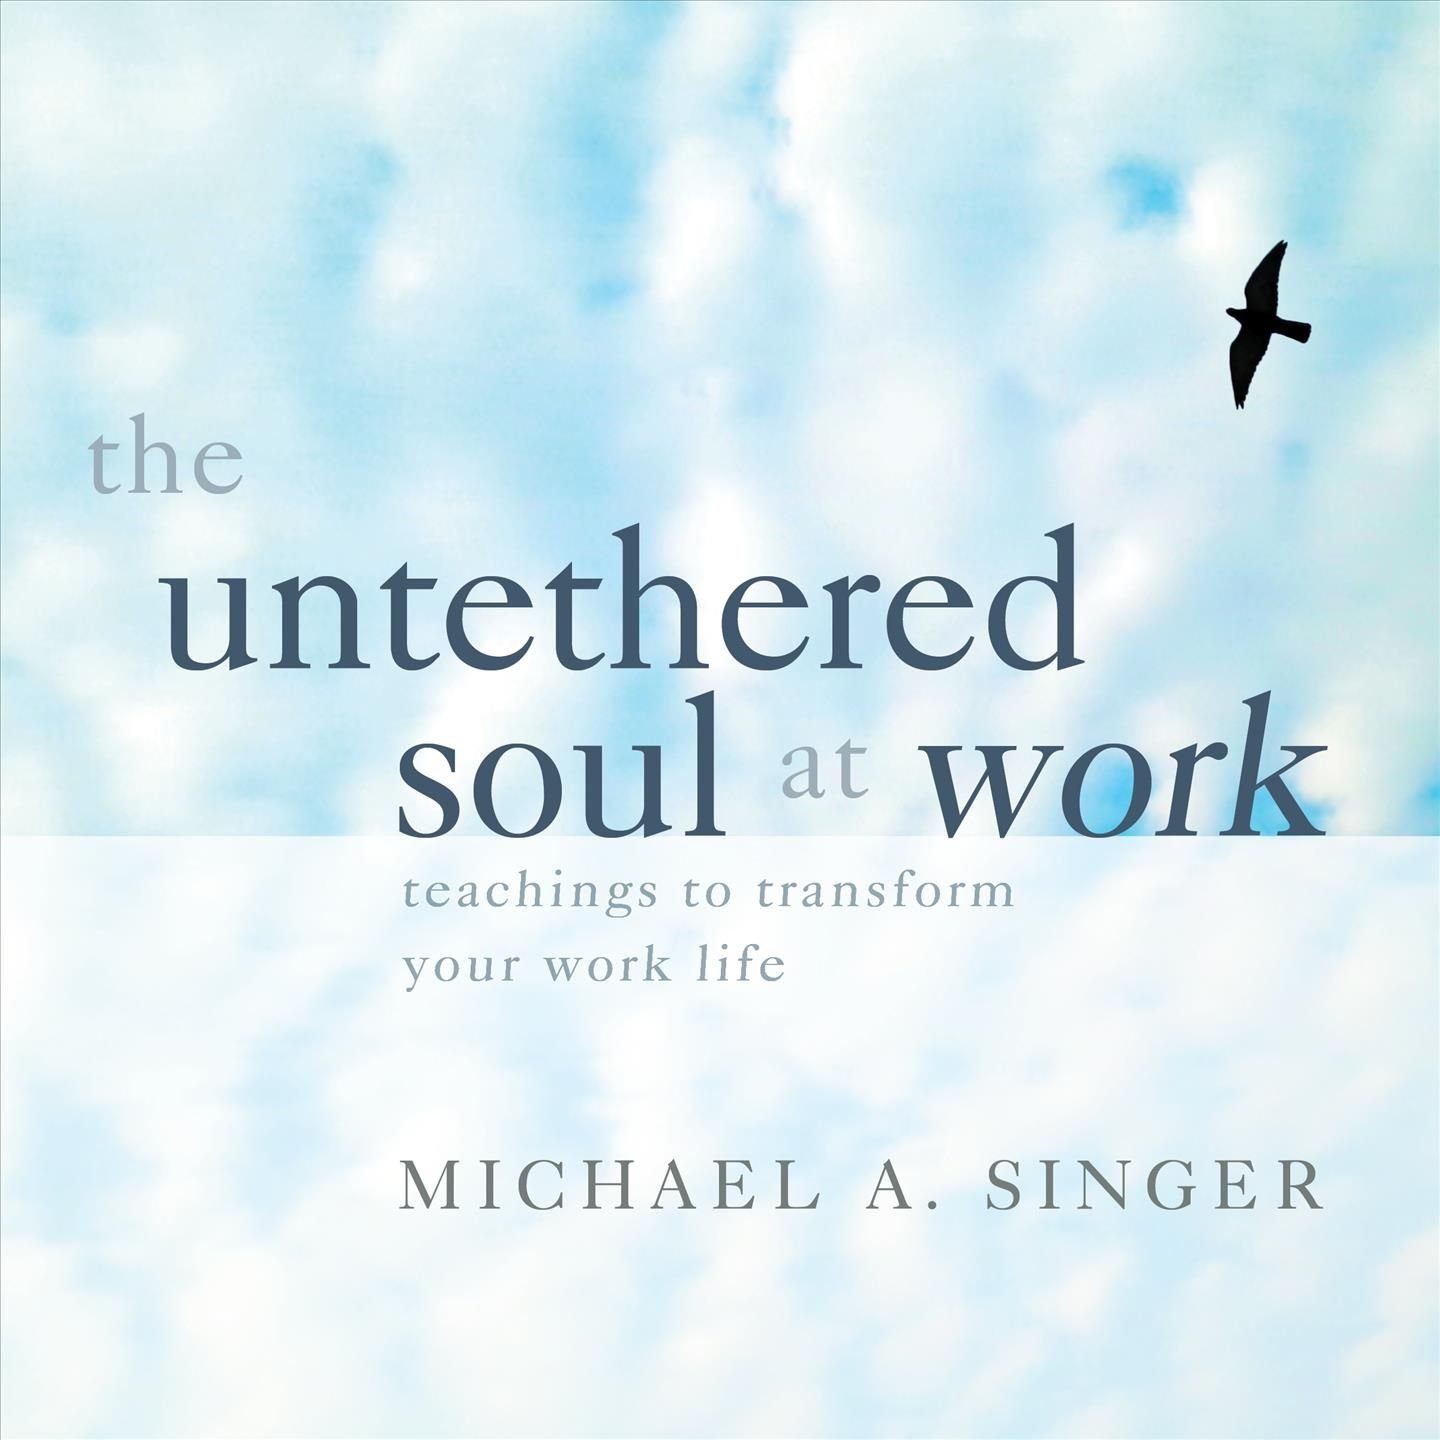 the untethered soul by michael a. singer